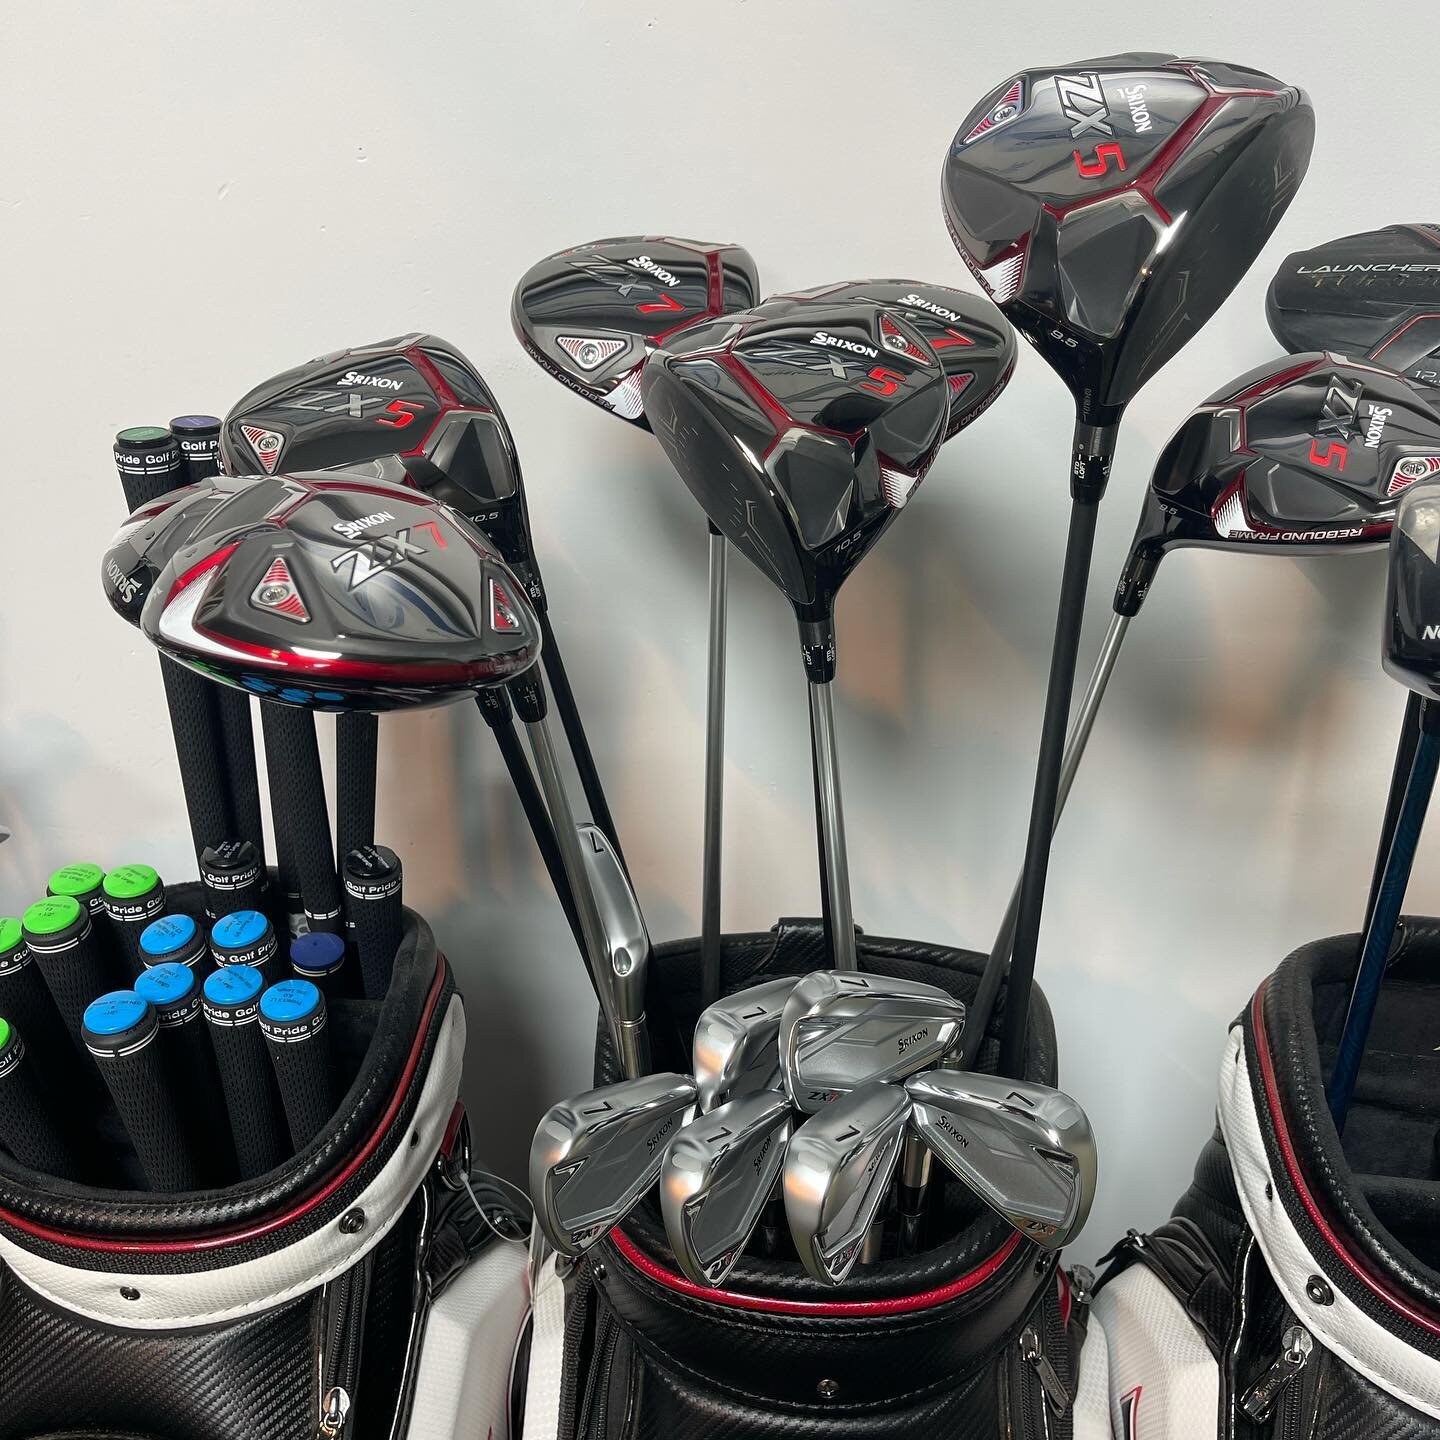 Very excited to get these demos/fitting clubs from @srixongolf here at the @highperformancegolfacademy. Contact me today to schedule your fitting and get equipped with some of the best equipment the golf business has to offer! #golf